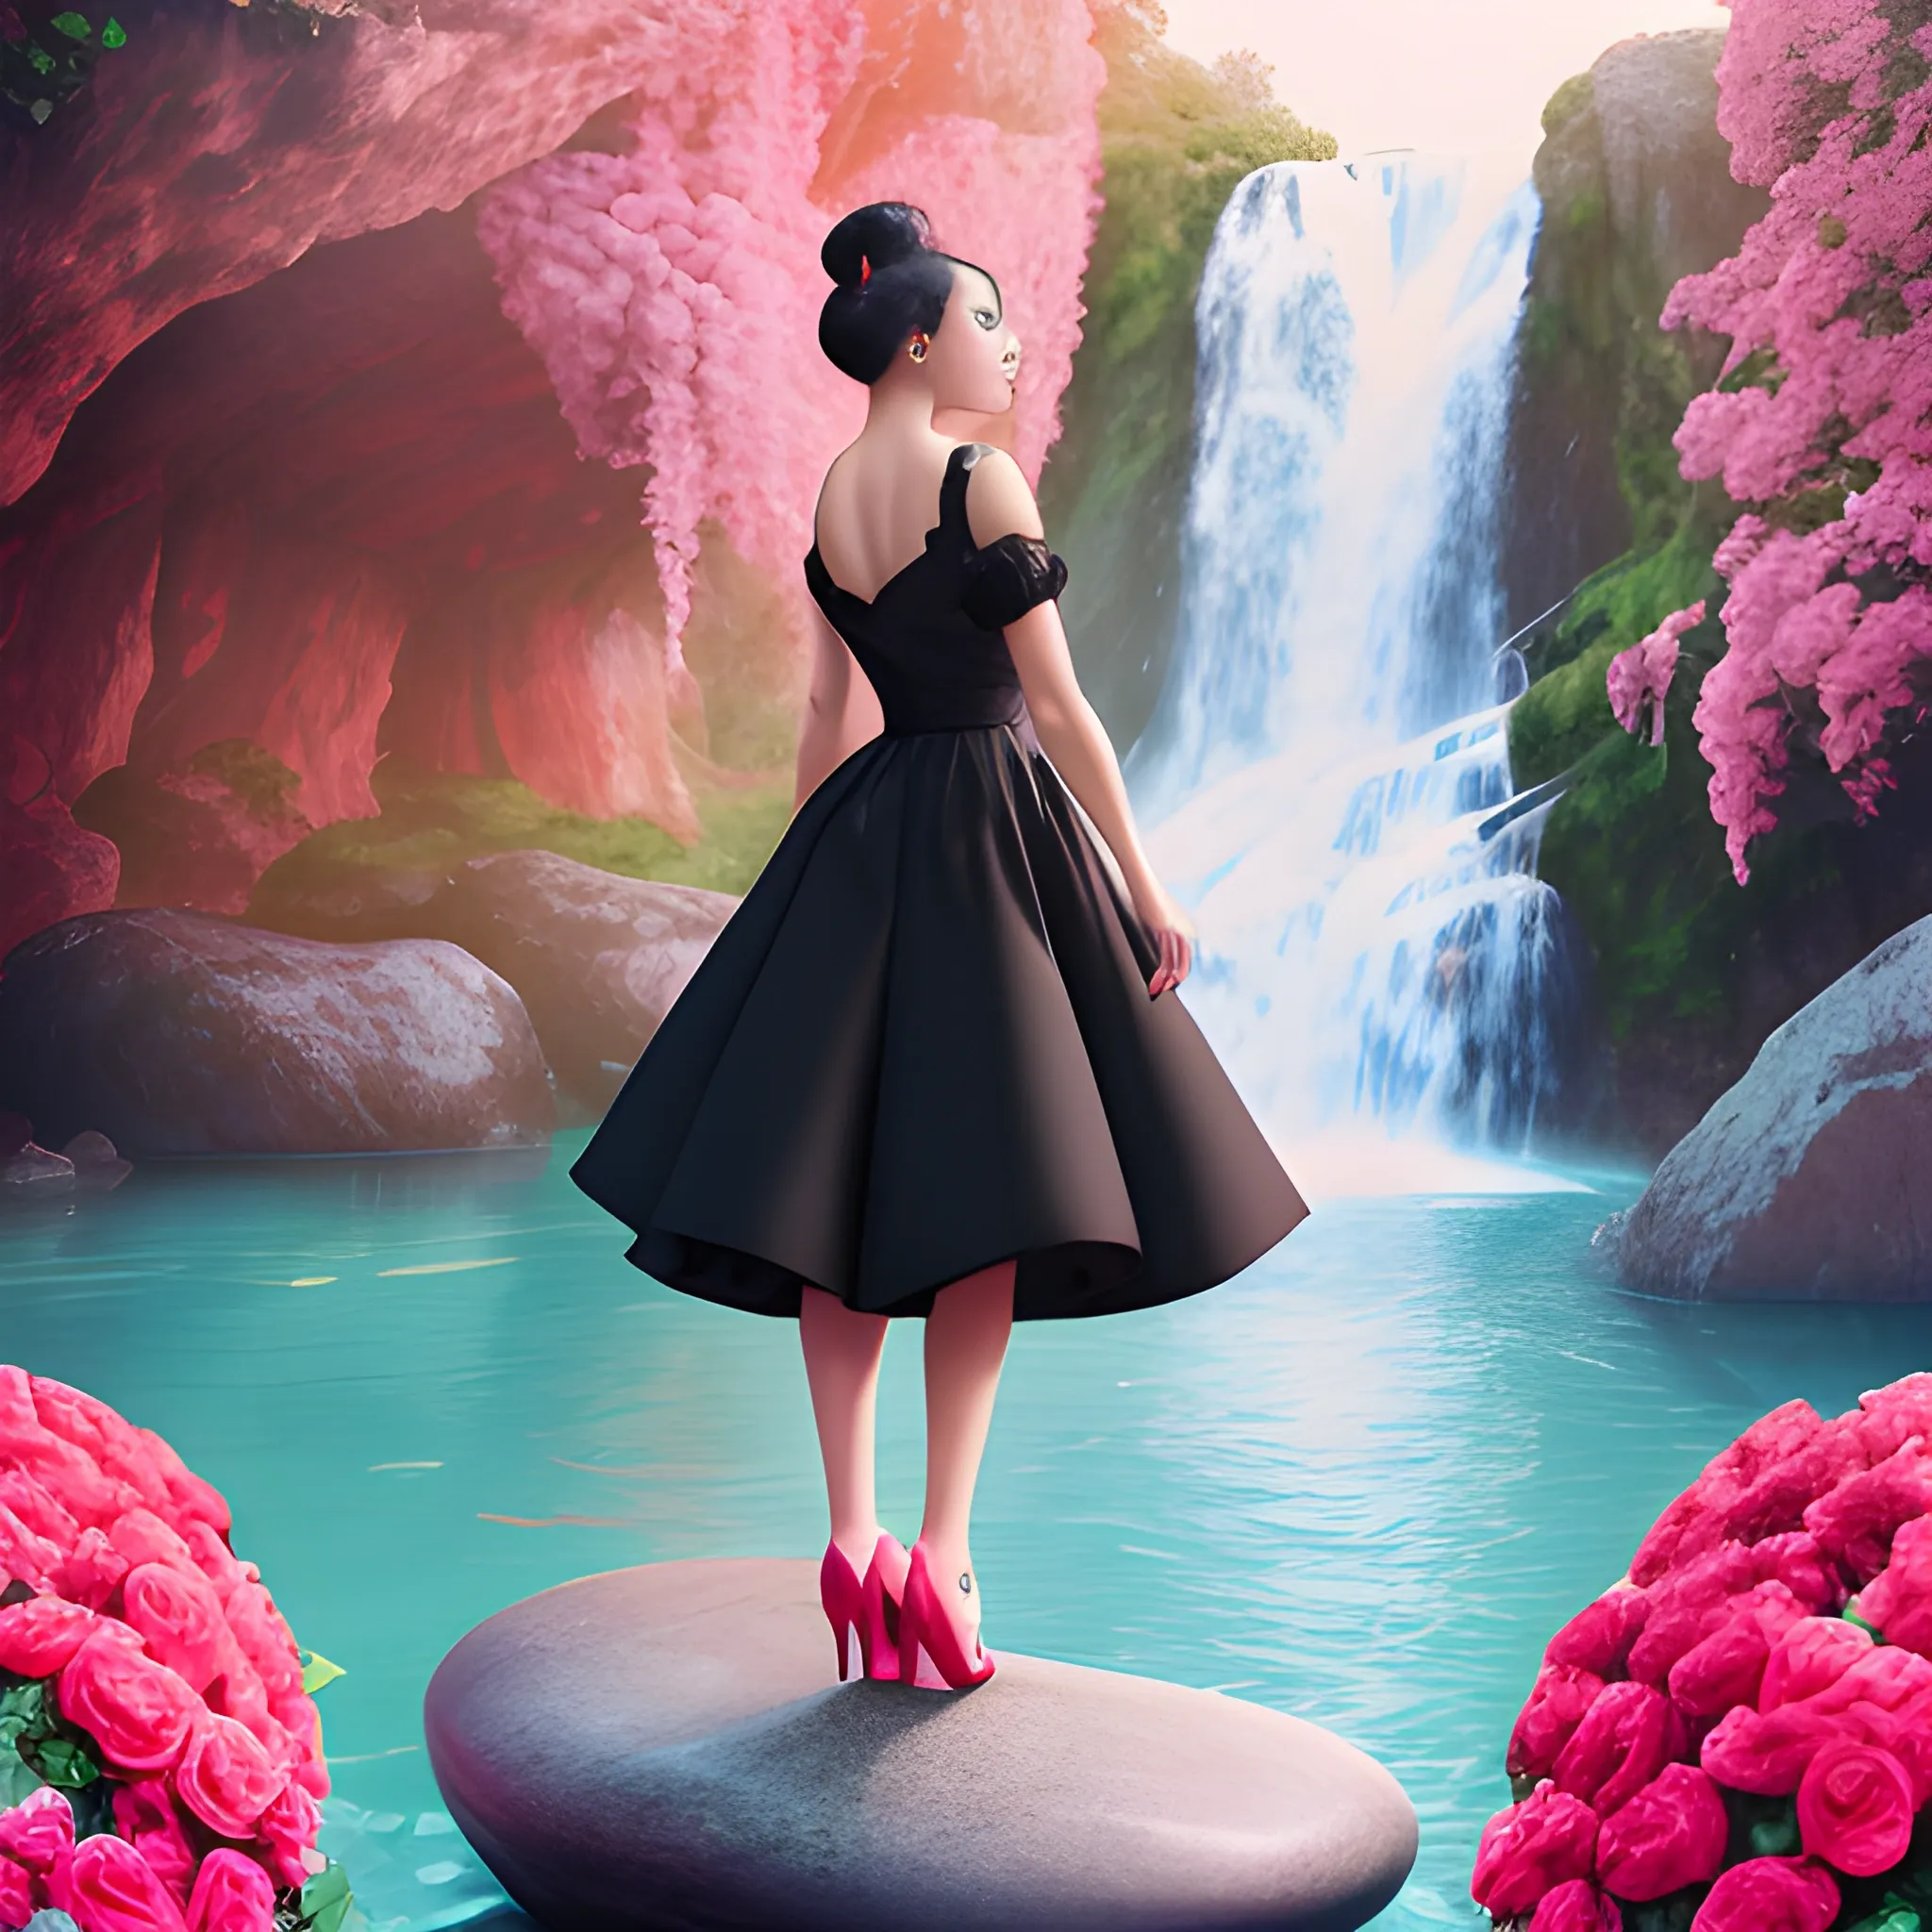 Very beautiful woman, black hair, bun hair, sexy red 
dress, standing on big stone, pink roses, light blue and pink, romanticism, high detail, 8K resolution, ultra high definition picture, waterfall background